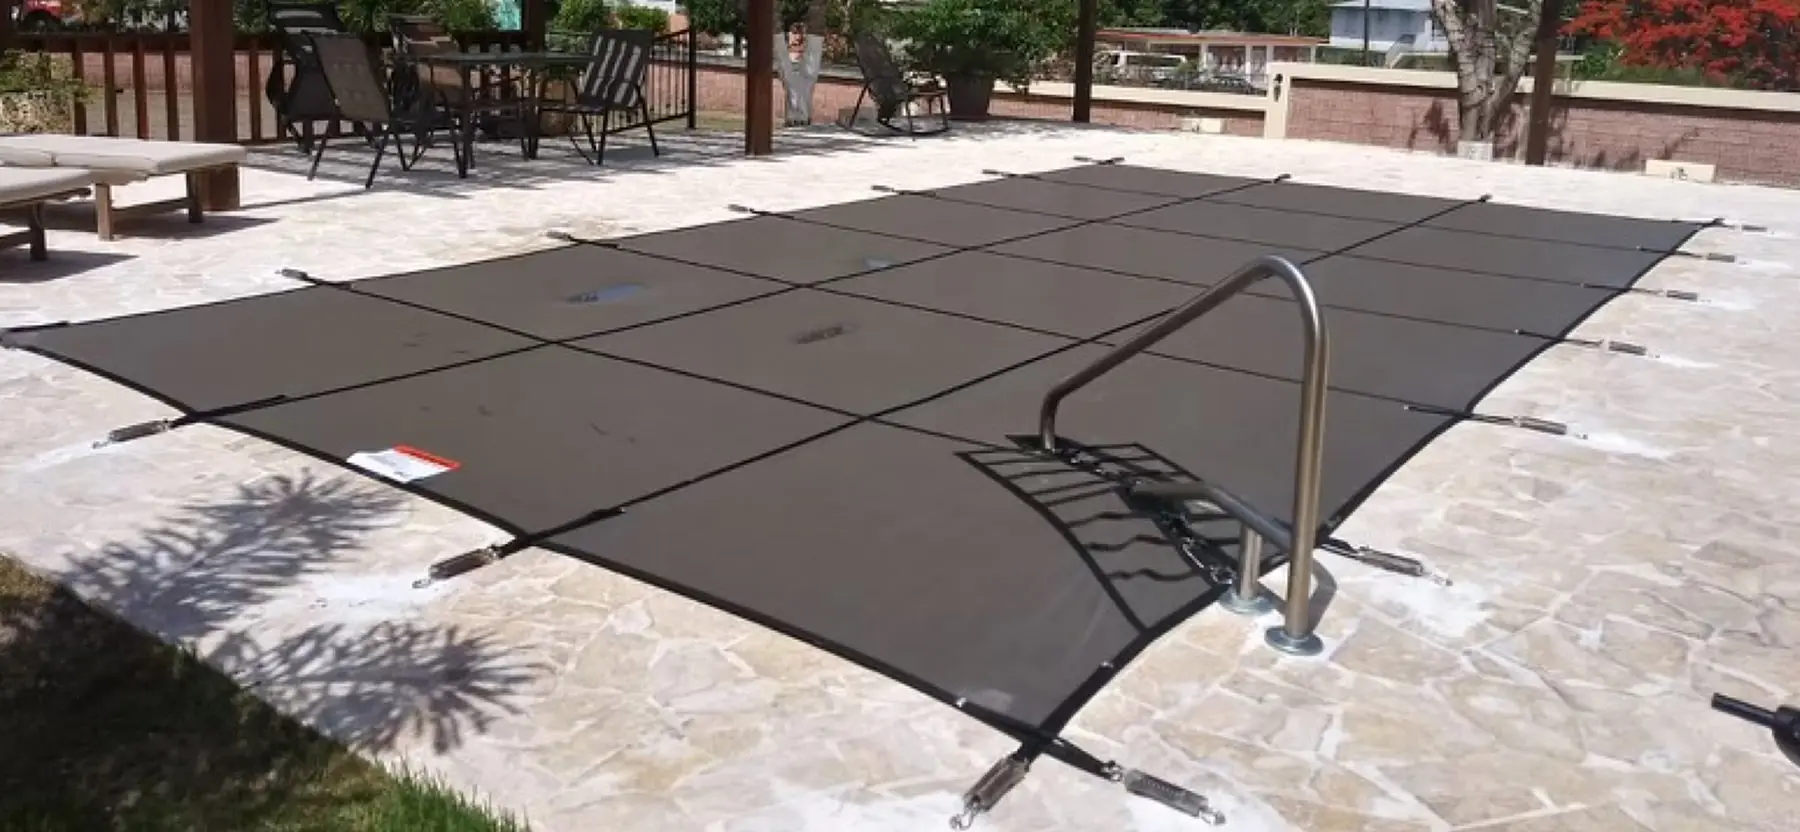 Safety Guard Inc. provides pool cover installation in North Georgia. A rectangular swimming pool with a black safety cover.